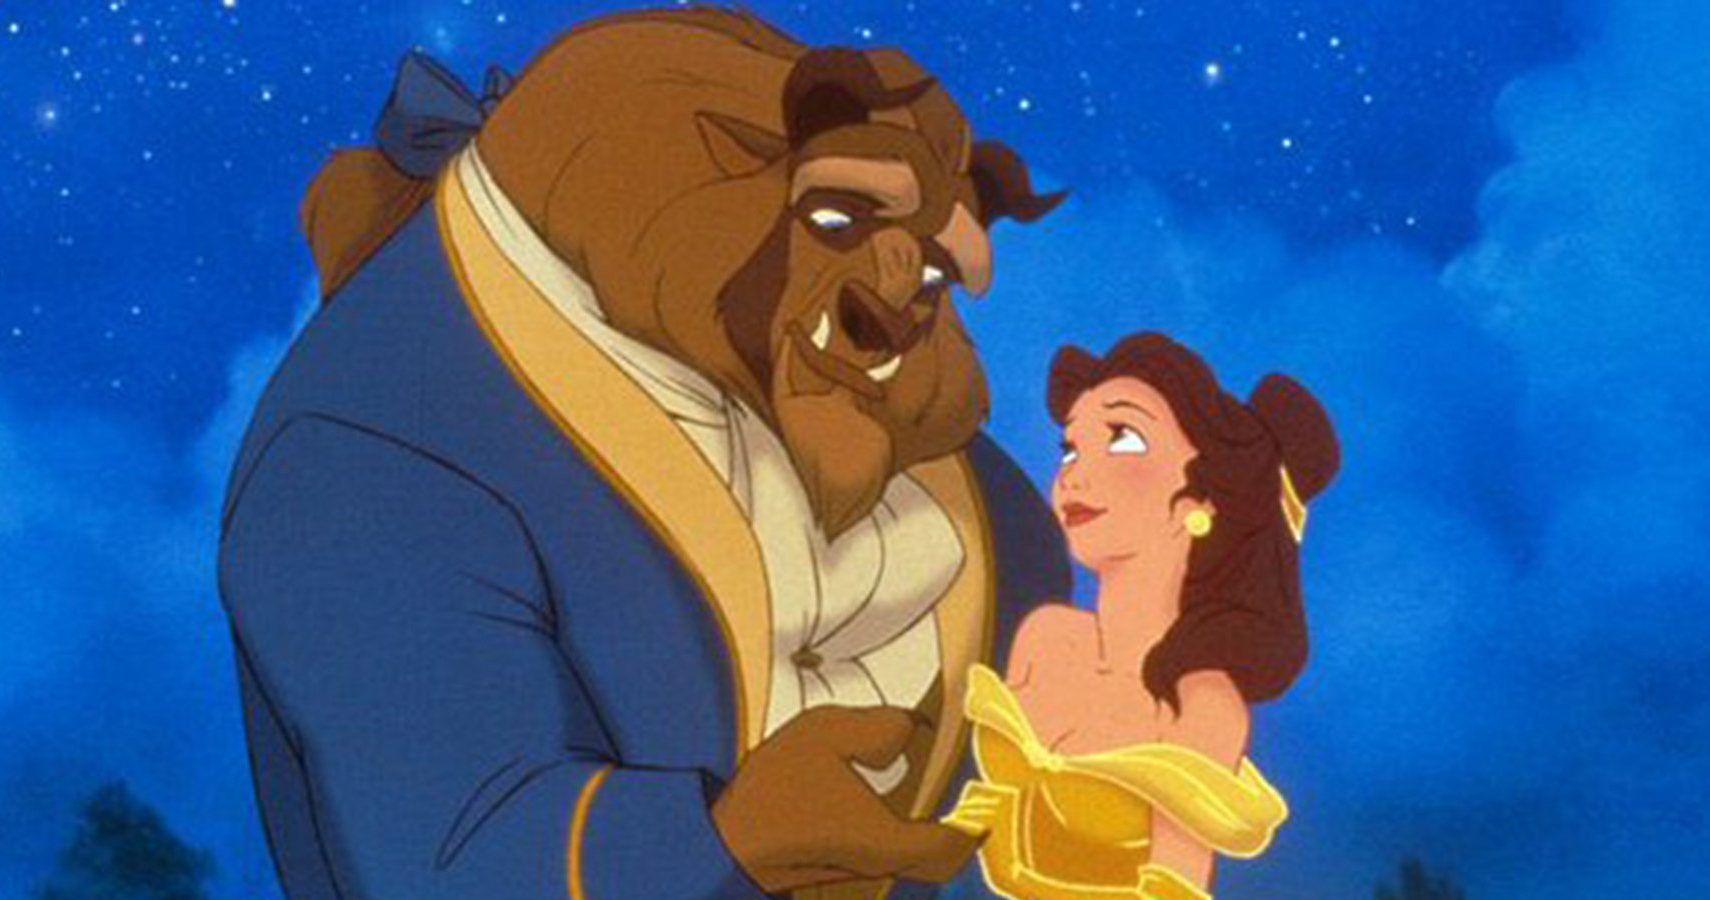 Disney: 10 Things That Don’t Make Sense About Beauty And The Beast (1991)